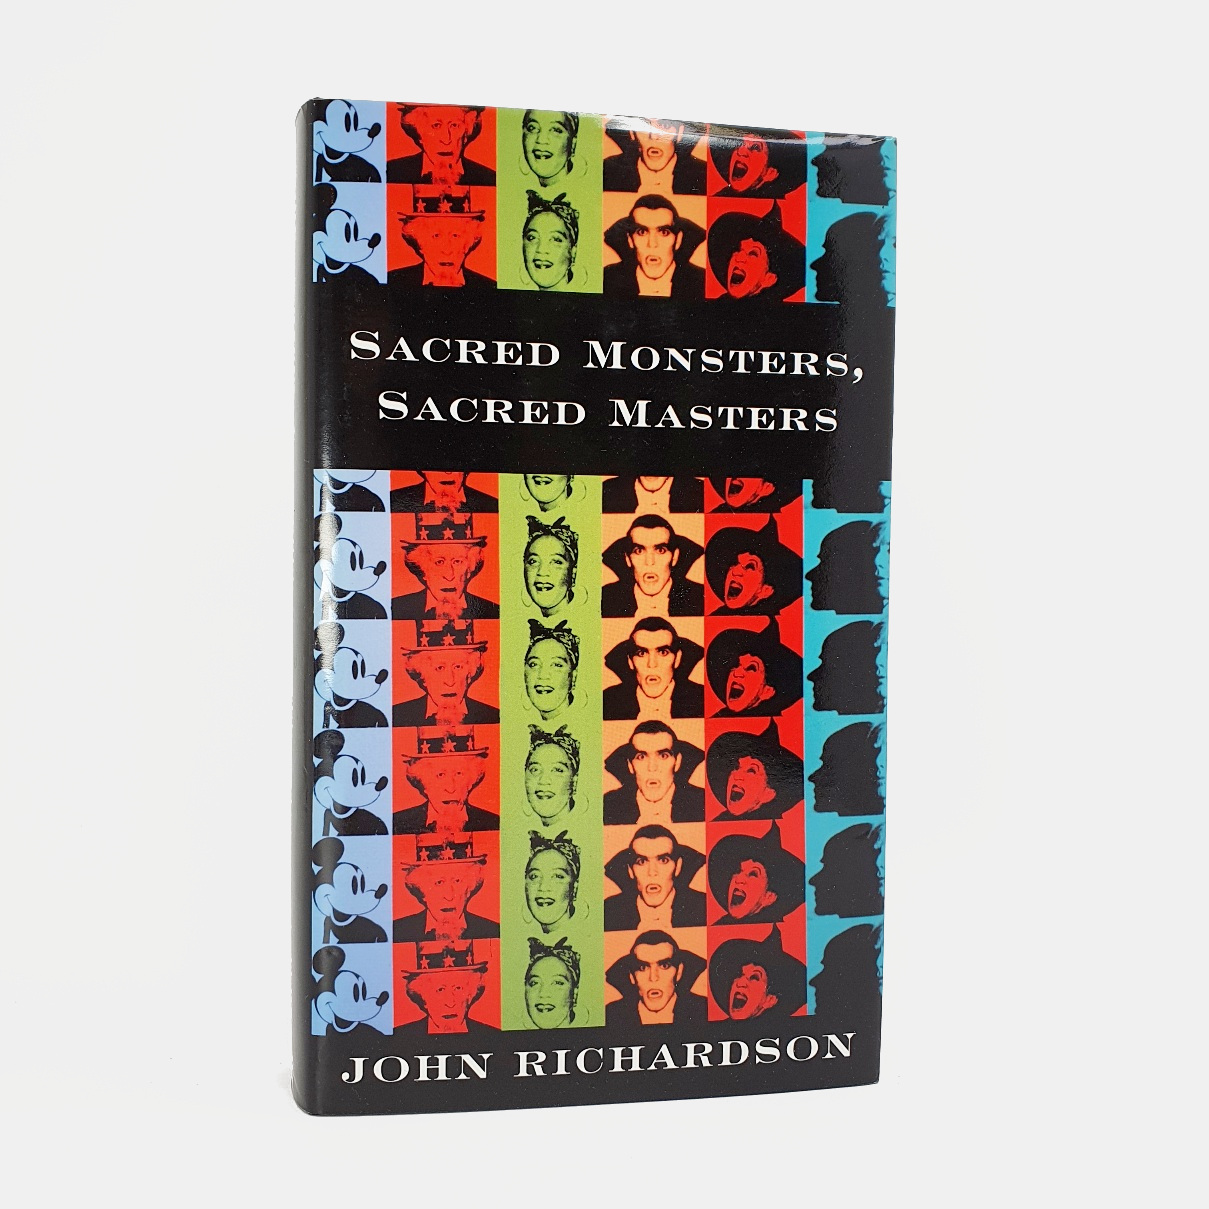 Sacred Monsters, Sacred Masters. Beaton, Capote, Dali, Picasso, Freud, Warhol, and More